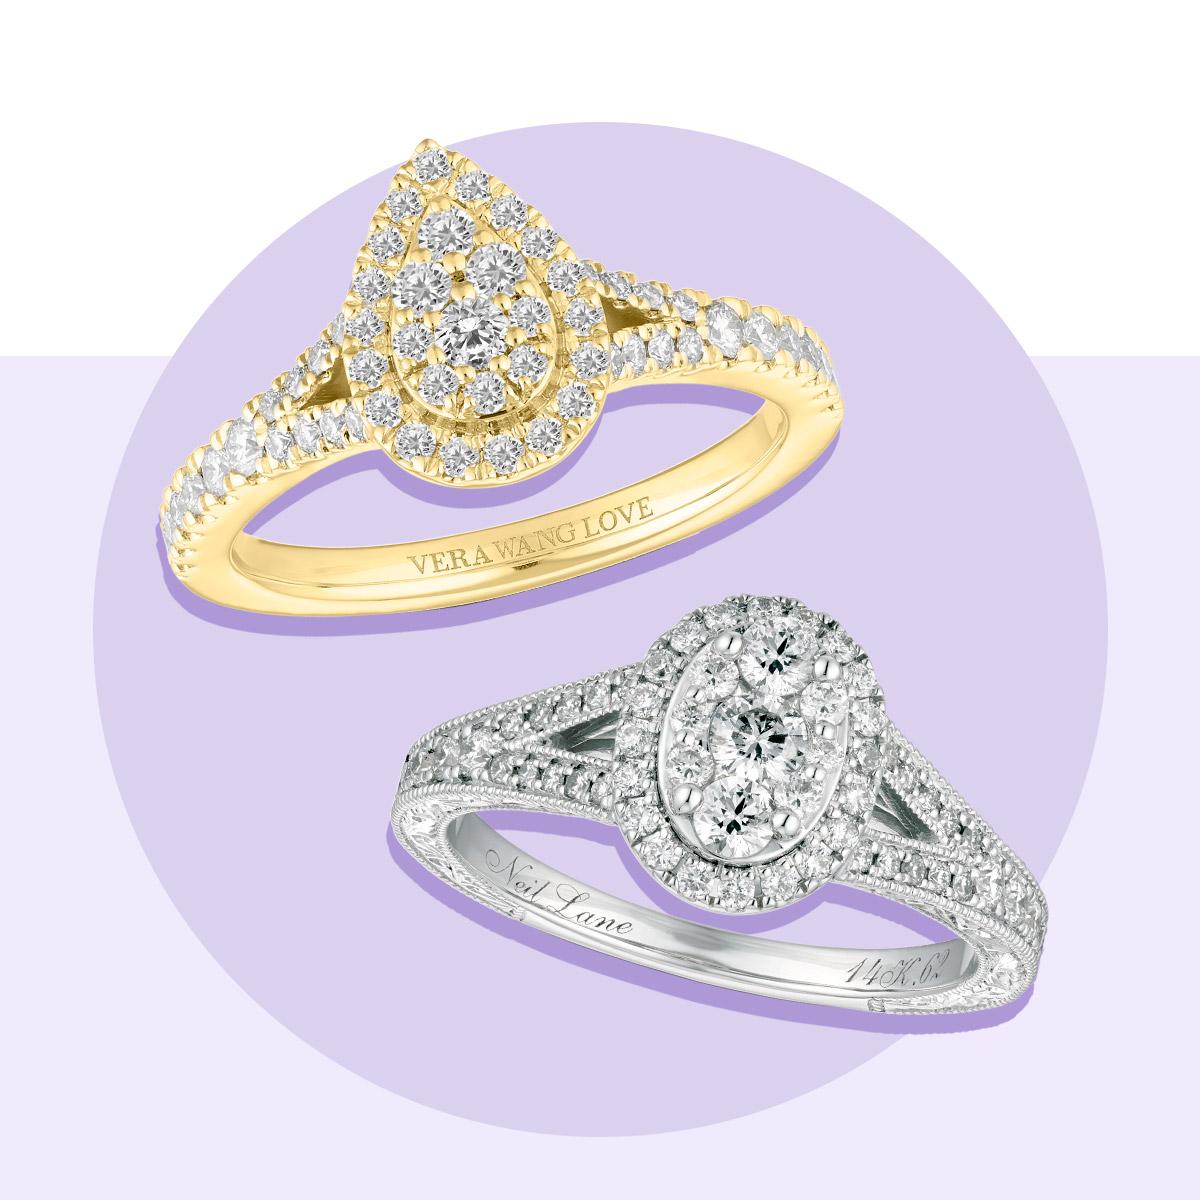 Cluster engagement rings